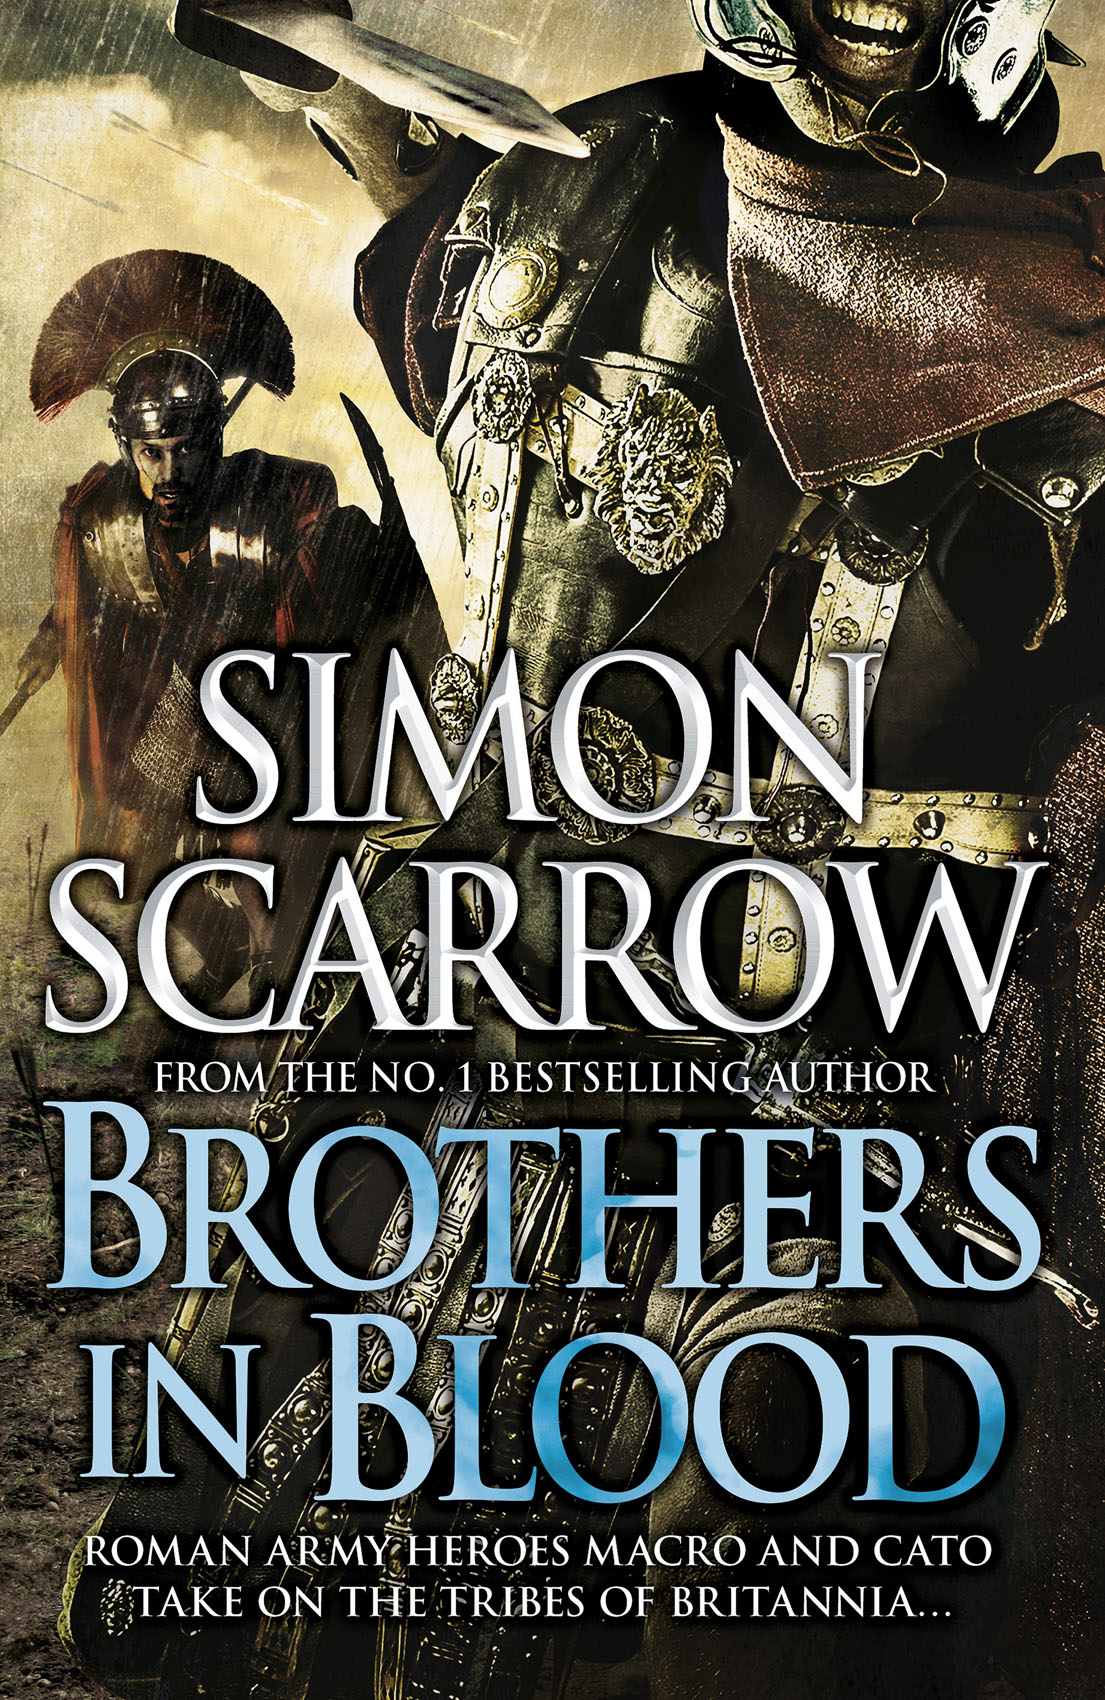 Brothers in Blood (2014) by Simon Scarrow